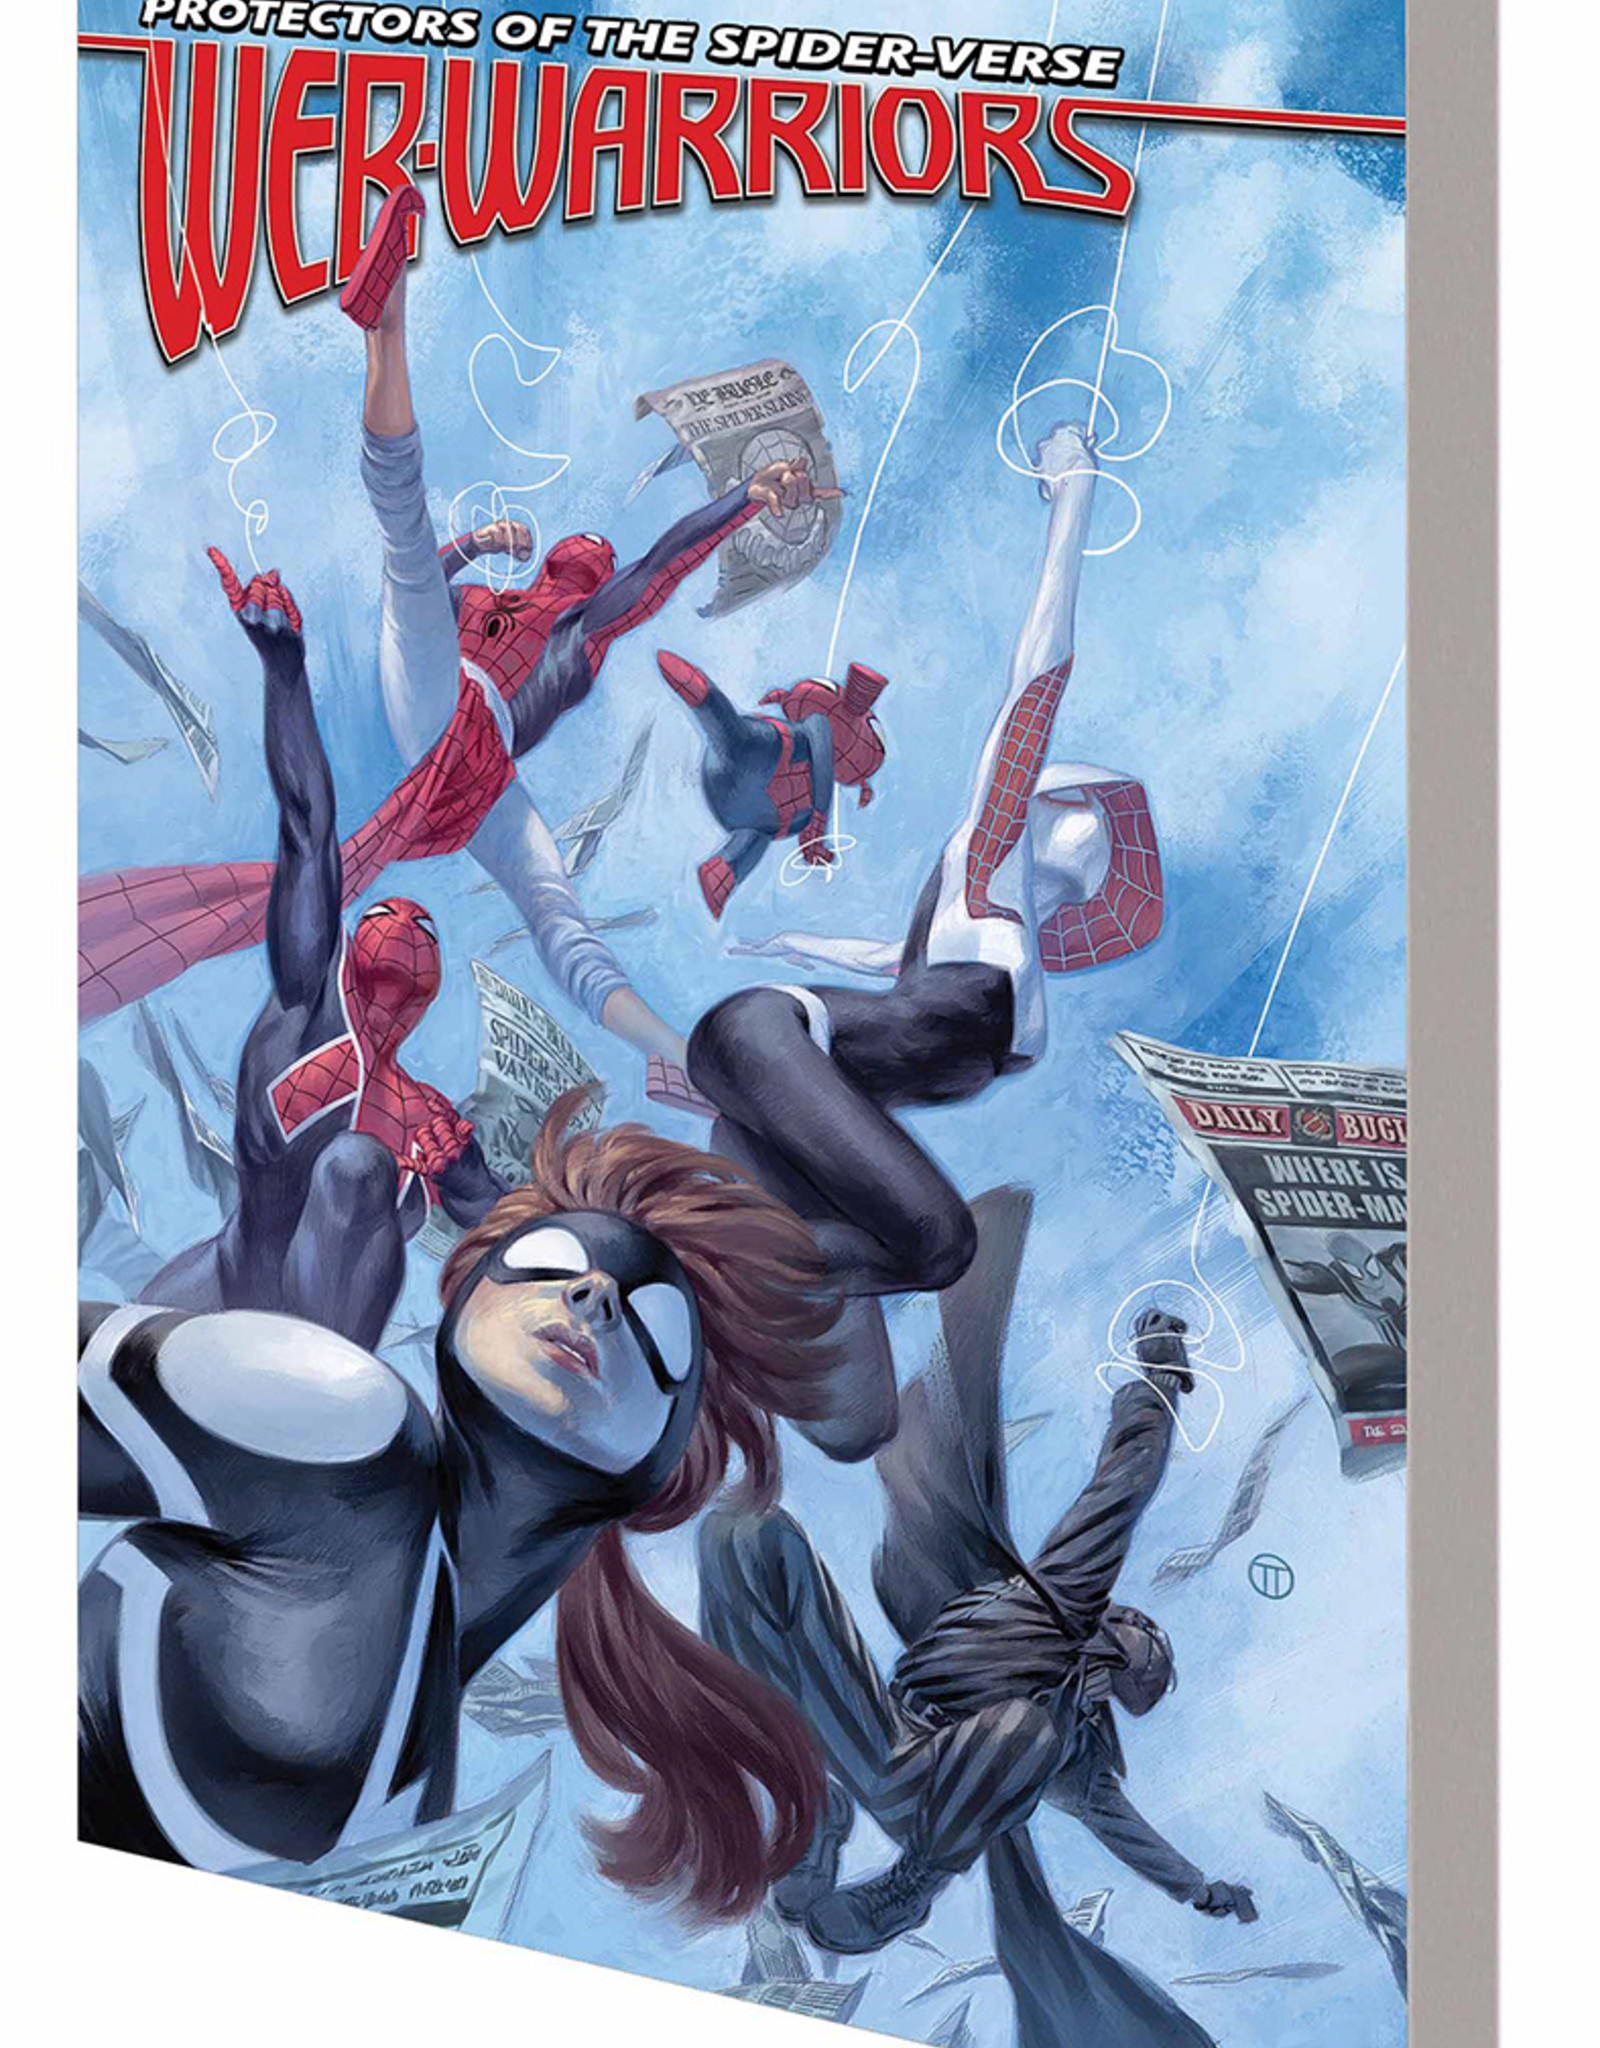 Marvel Comics Web Warriors of Spider-verse TP Volume 01 Electroverse